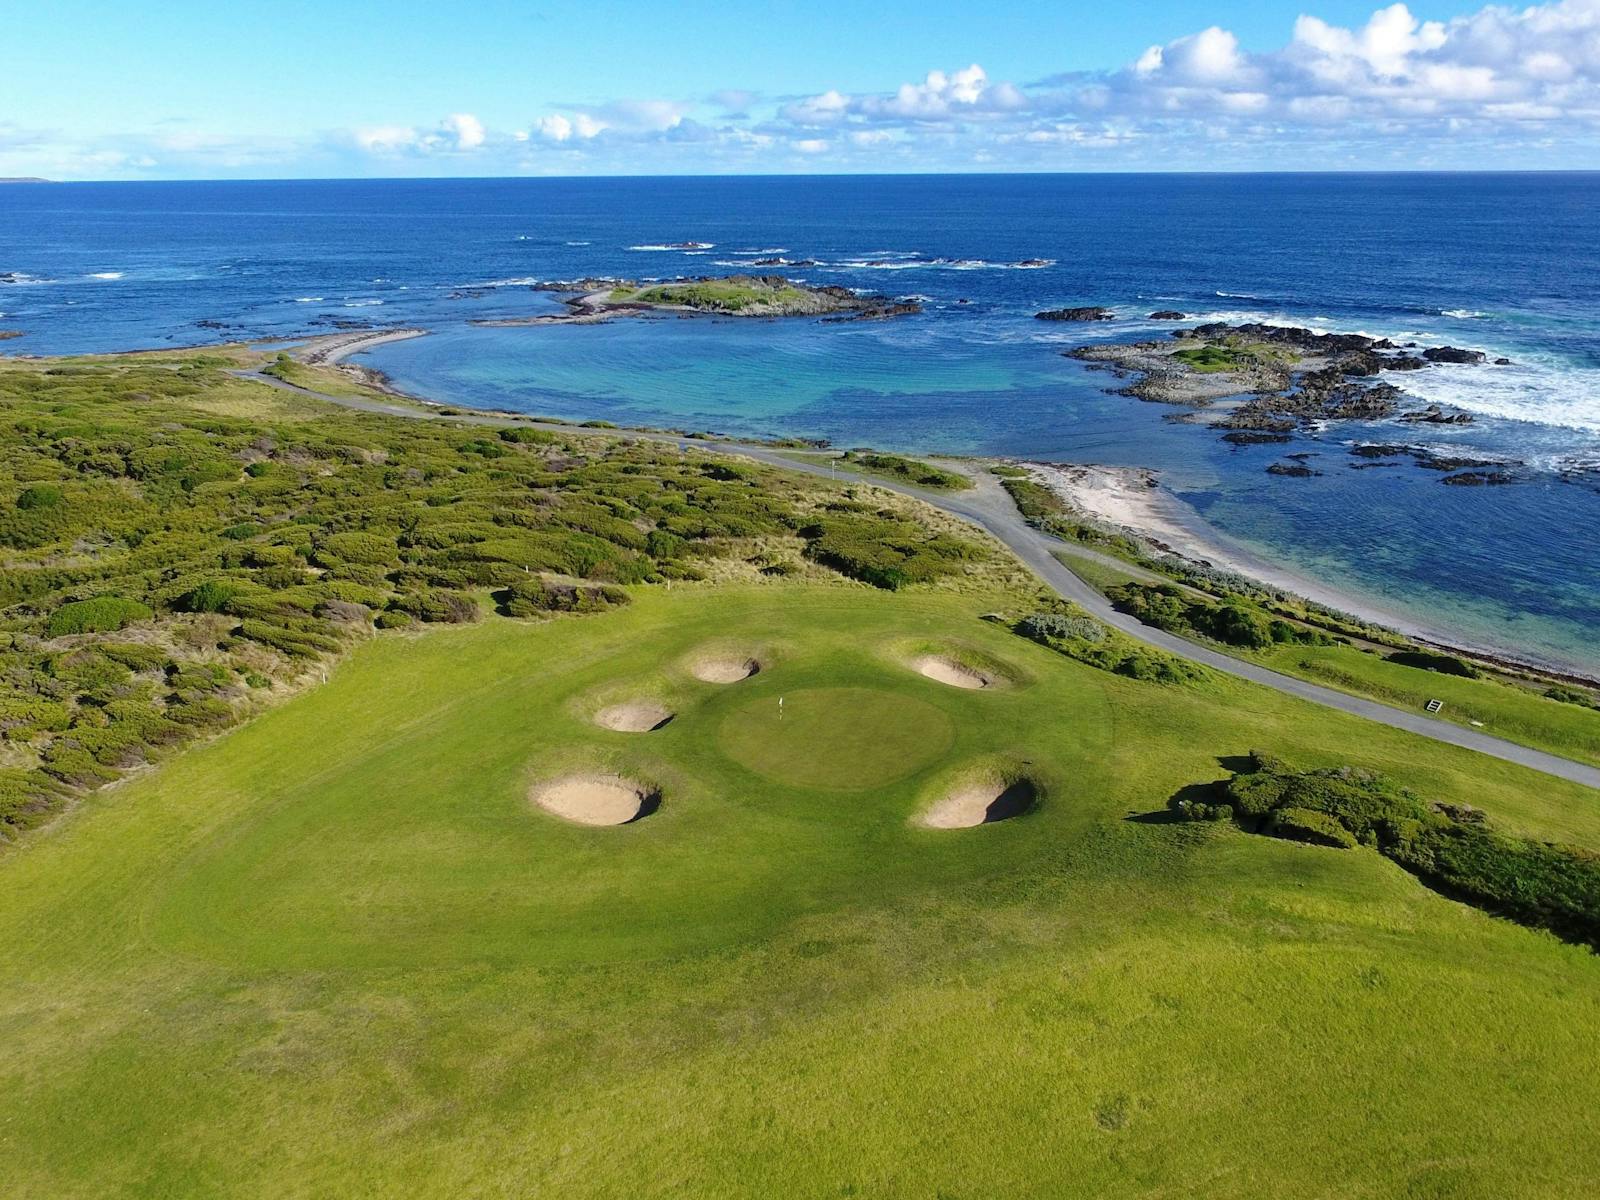 This is a photo of the third green on the King Island Course.  The green is by the sea.